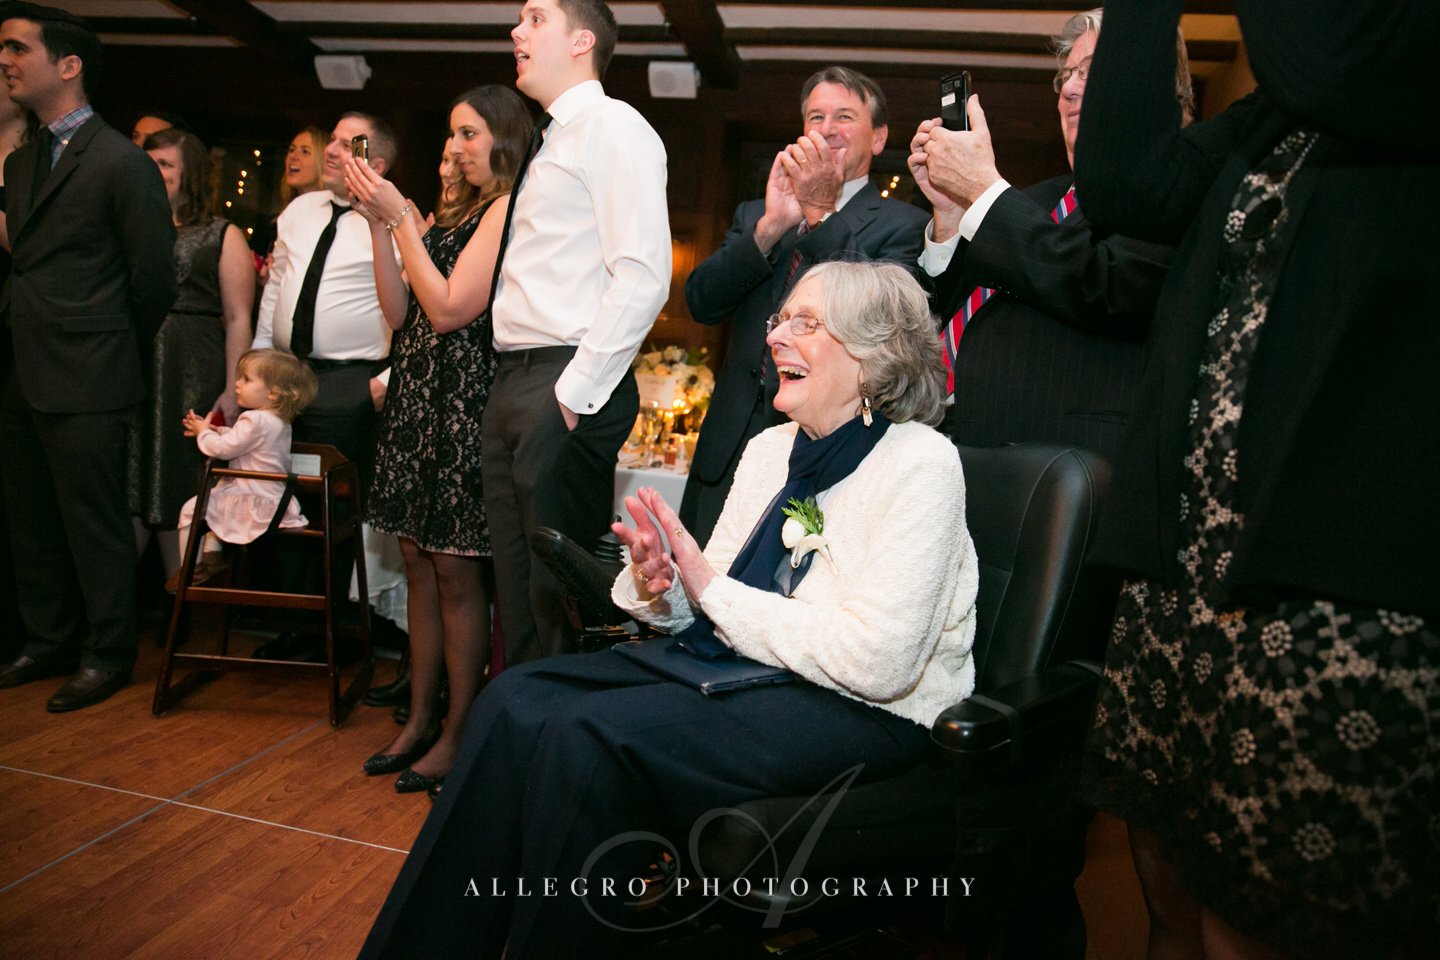 grandmother at wedding- photo by allegro photography